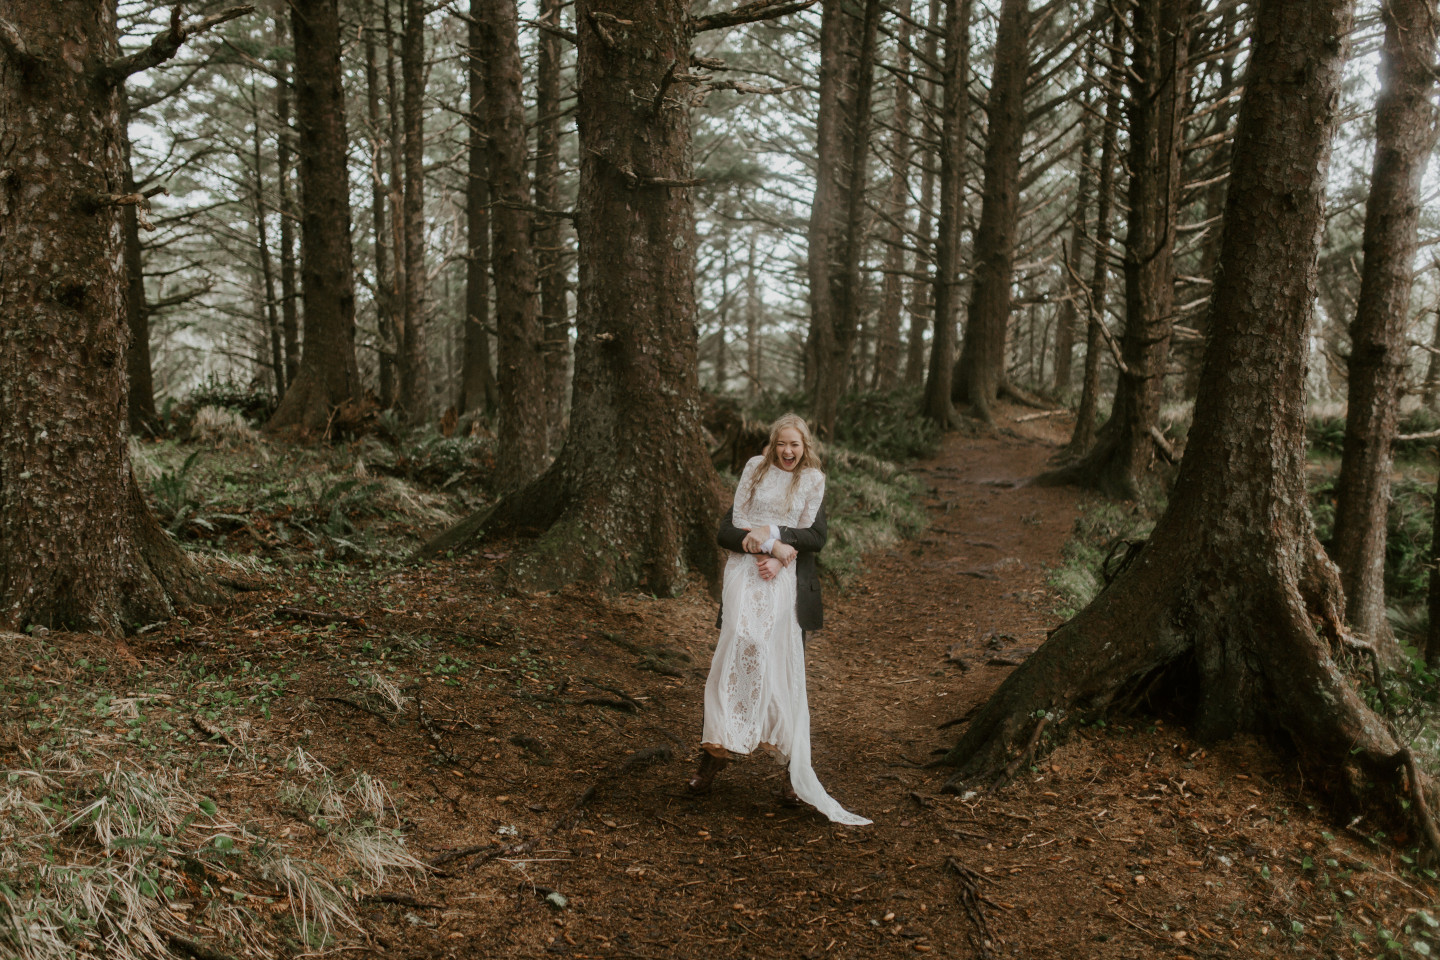 Grant lifts Hannah up during their Oregon coast elopement. Wedding photography in Portland Oregon by Sienna Plus Josh.